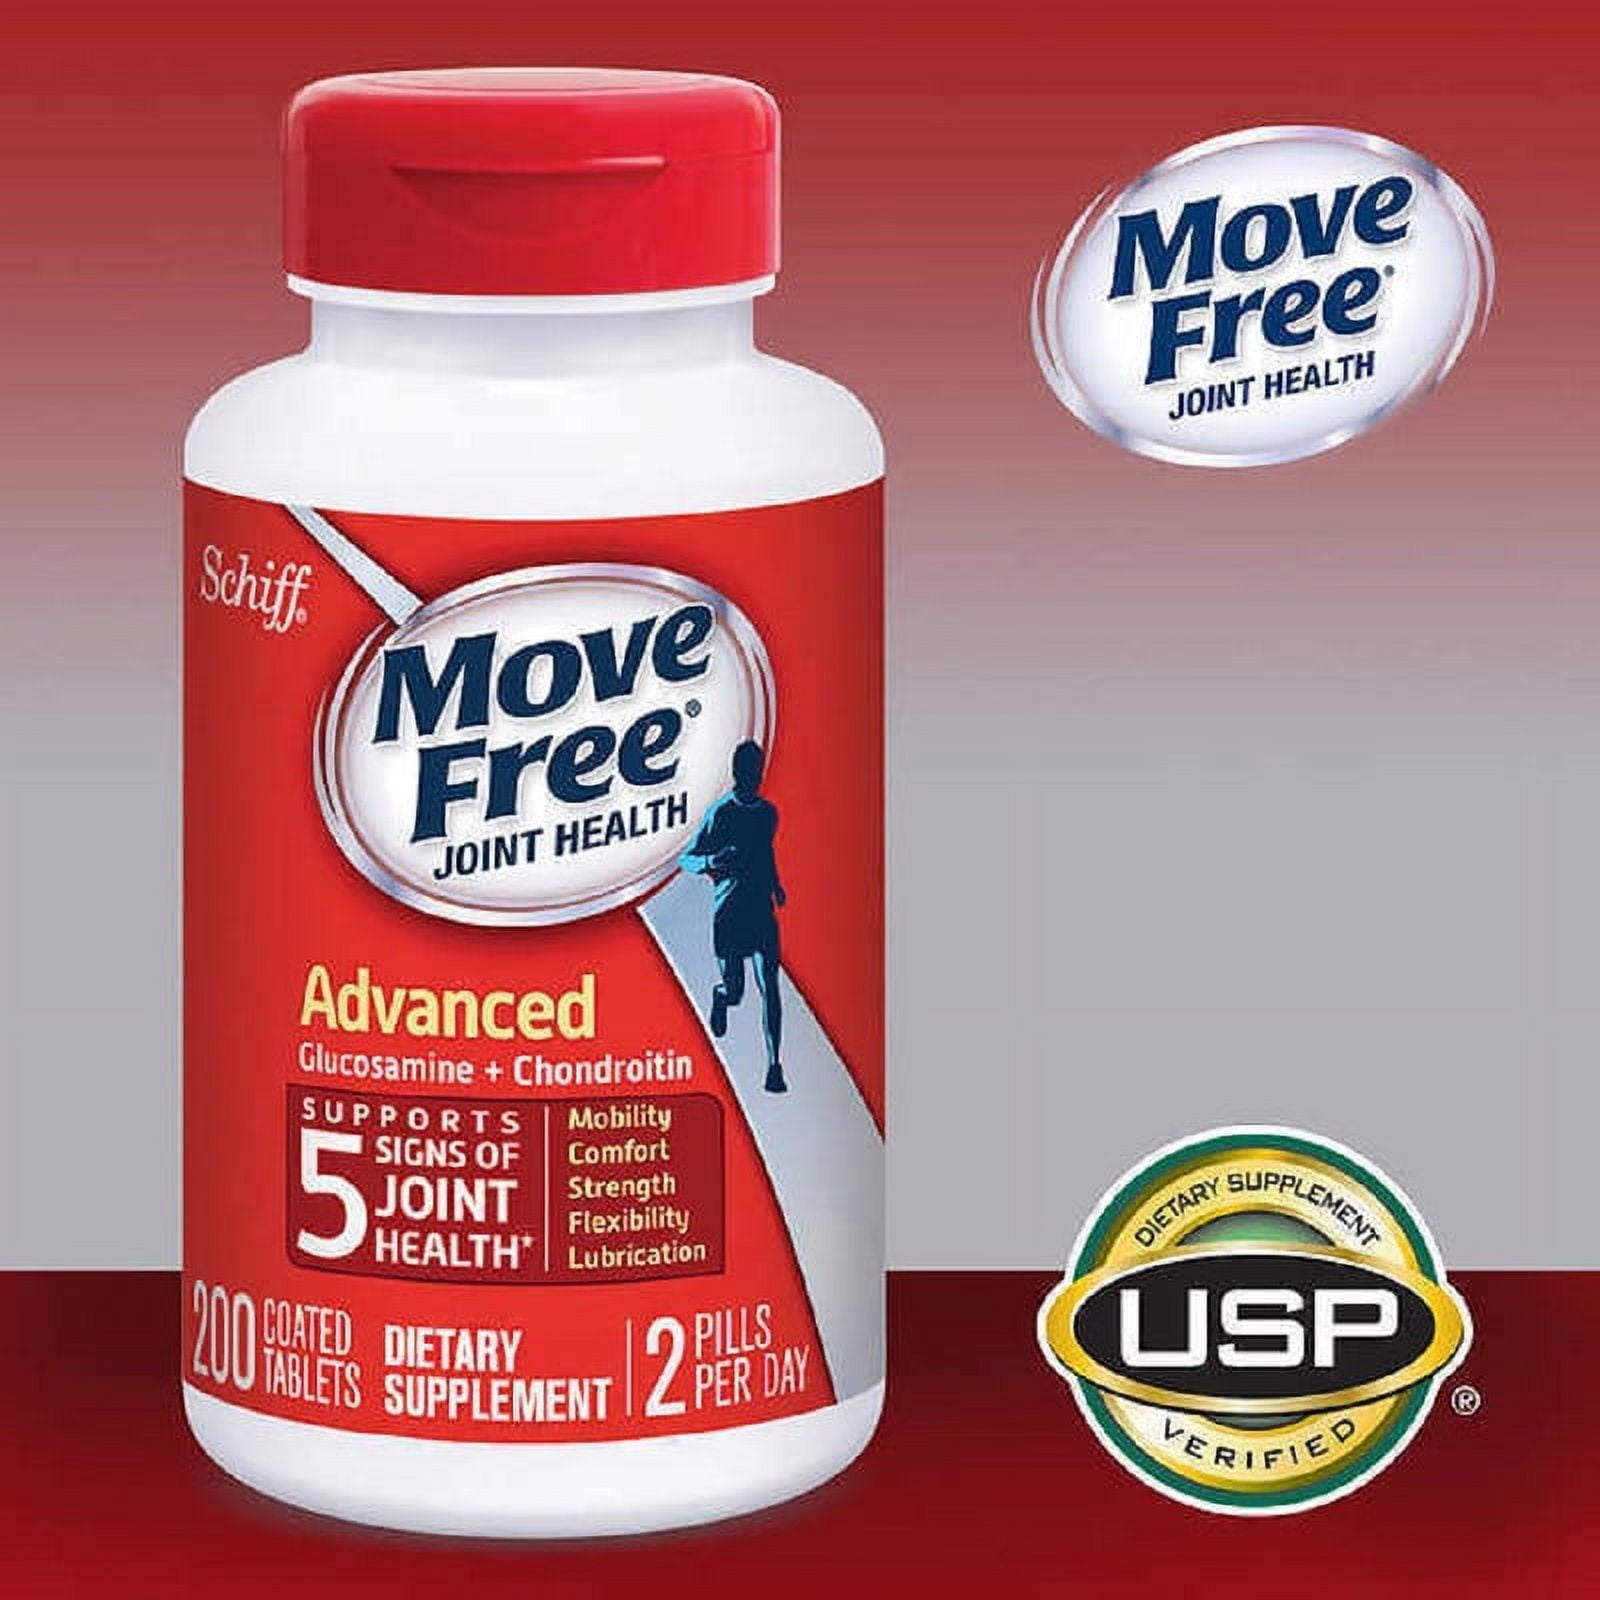 Schiff Move Free Advanced Joint Supplement, 200 Tablets